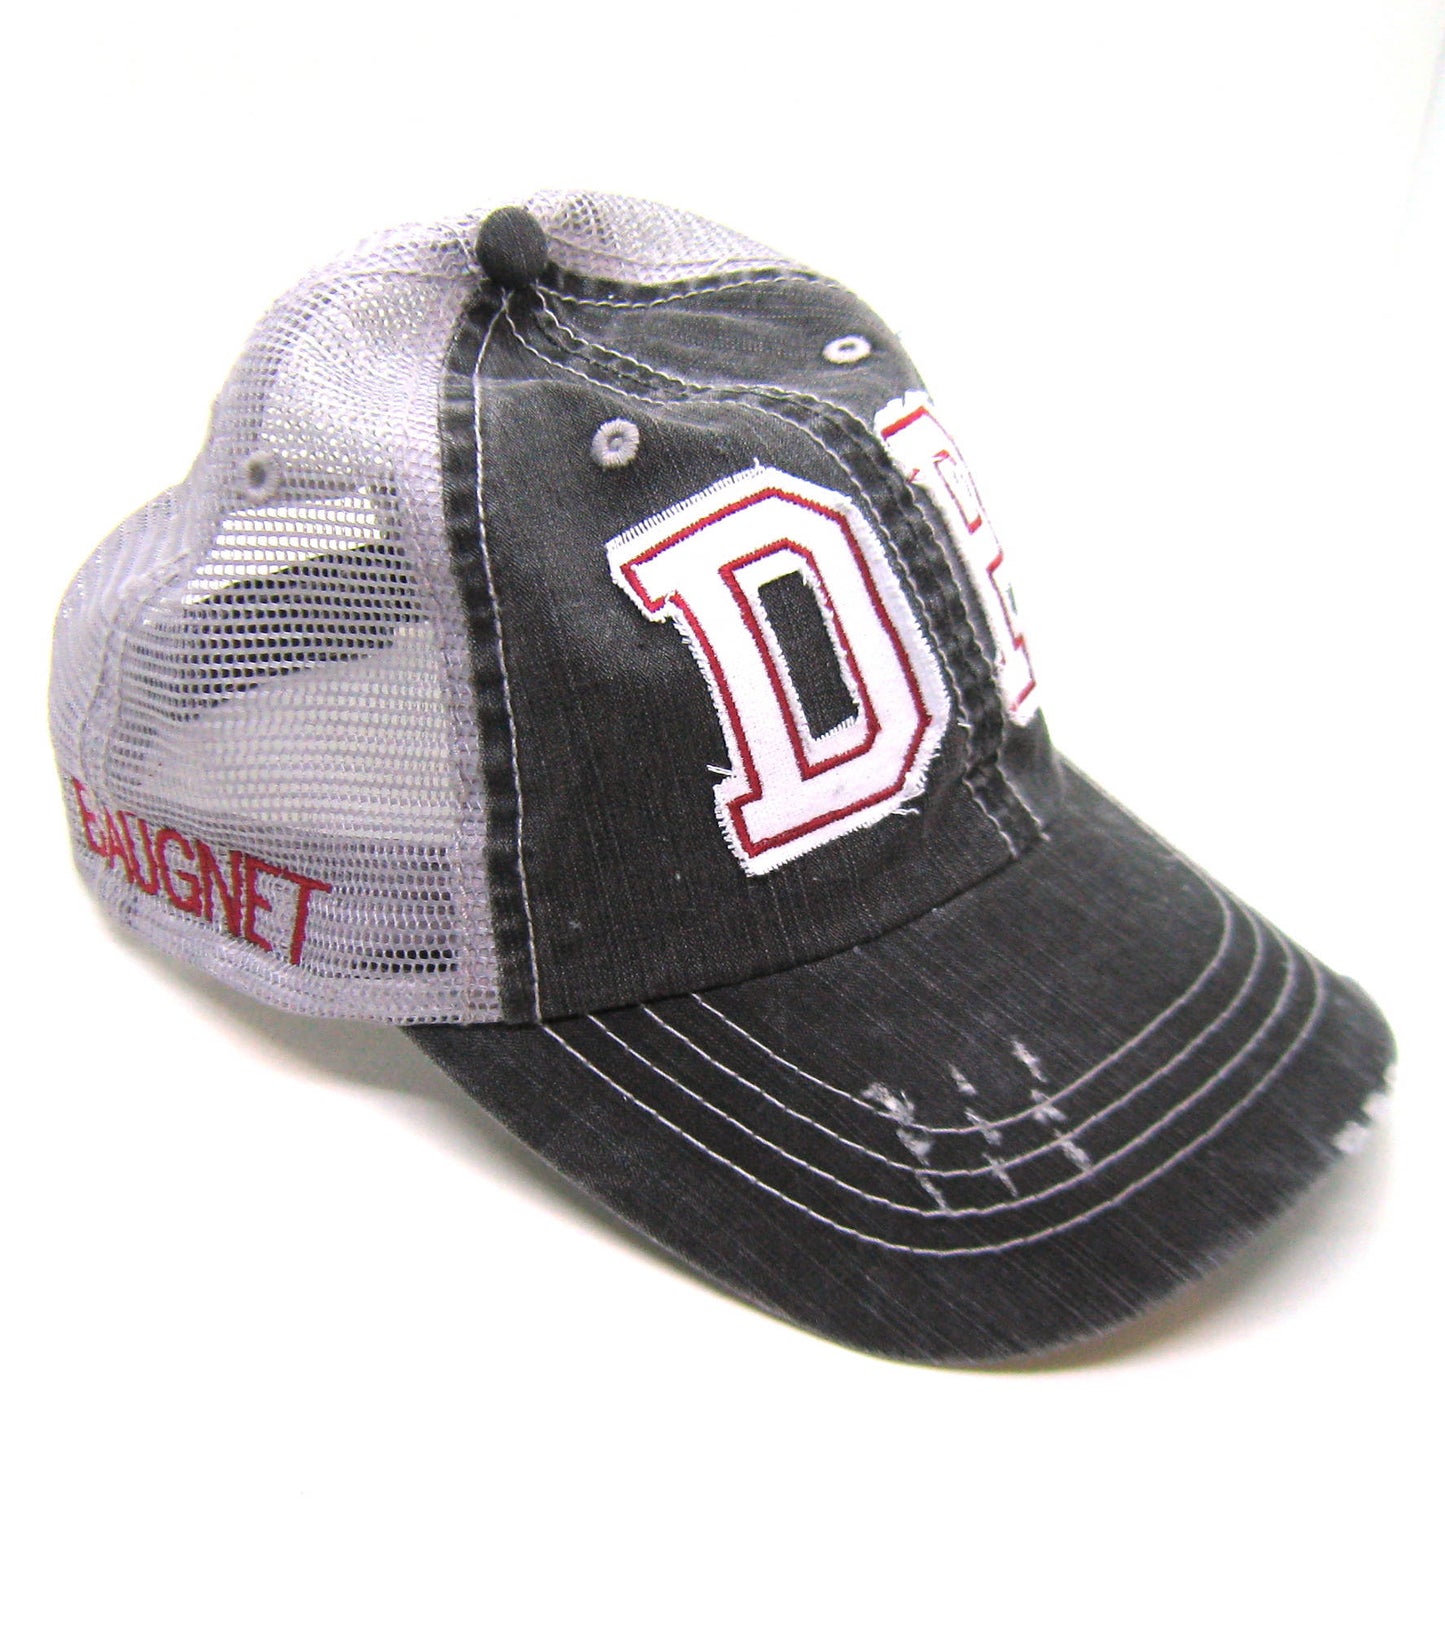 Gray Distressed Trucker Hat - DP De Pere Hat - White Lettering with Cardinal Red Stitiching